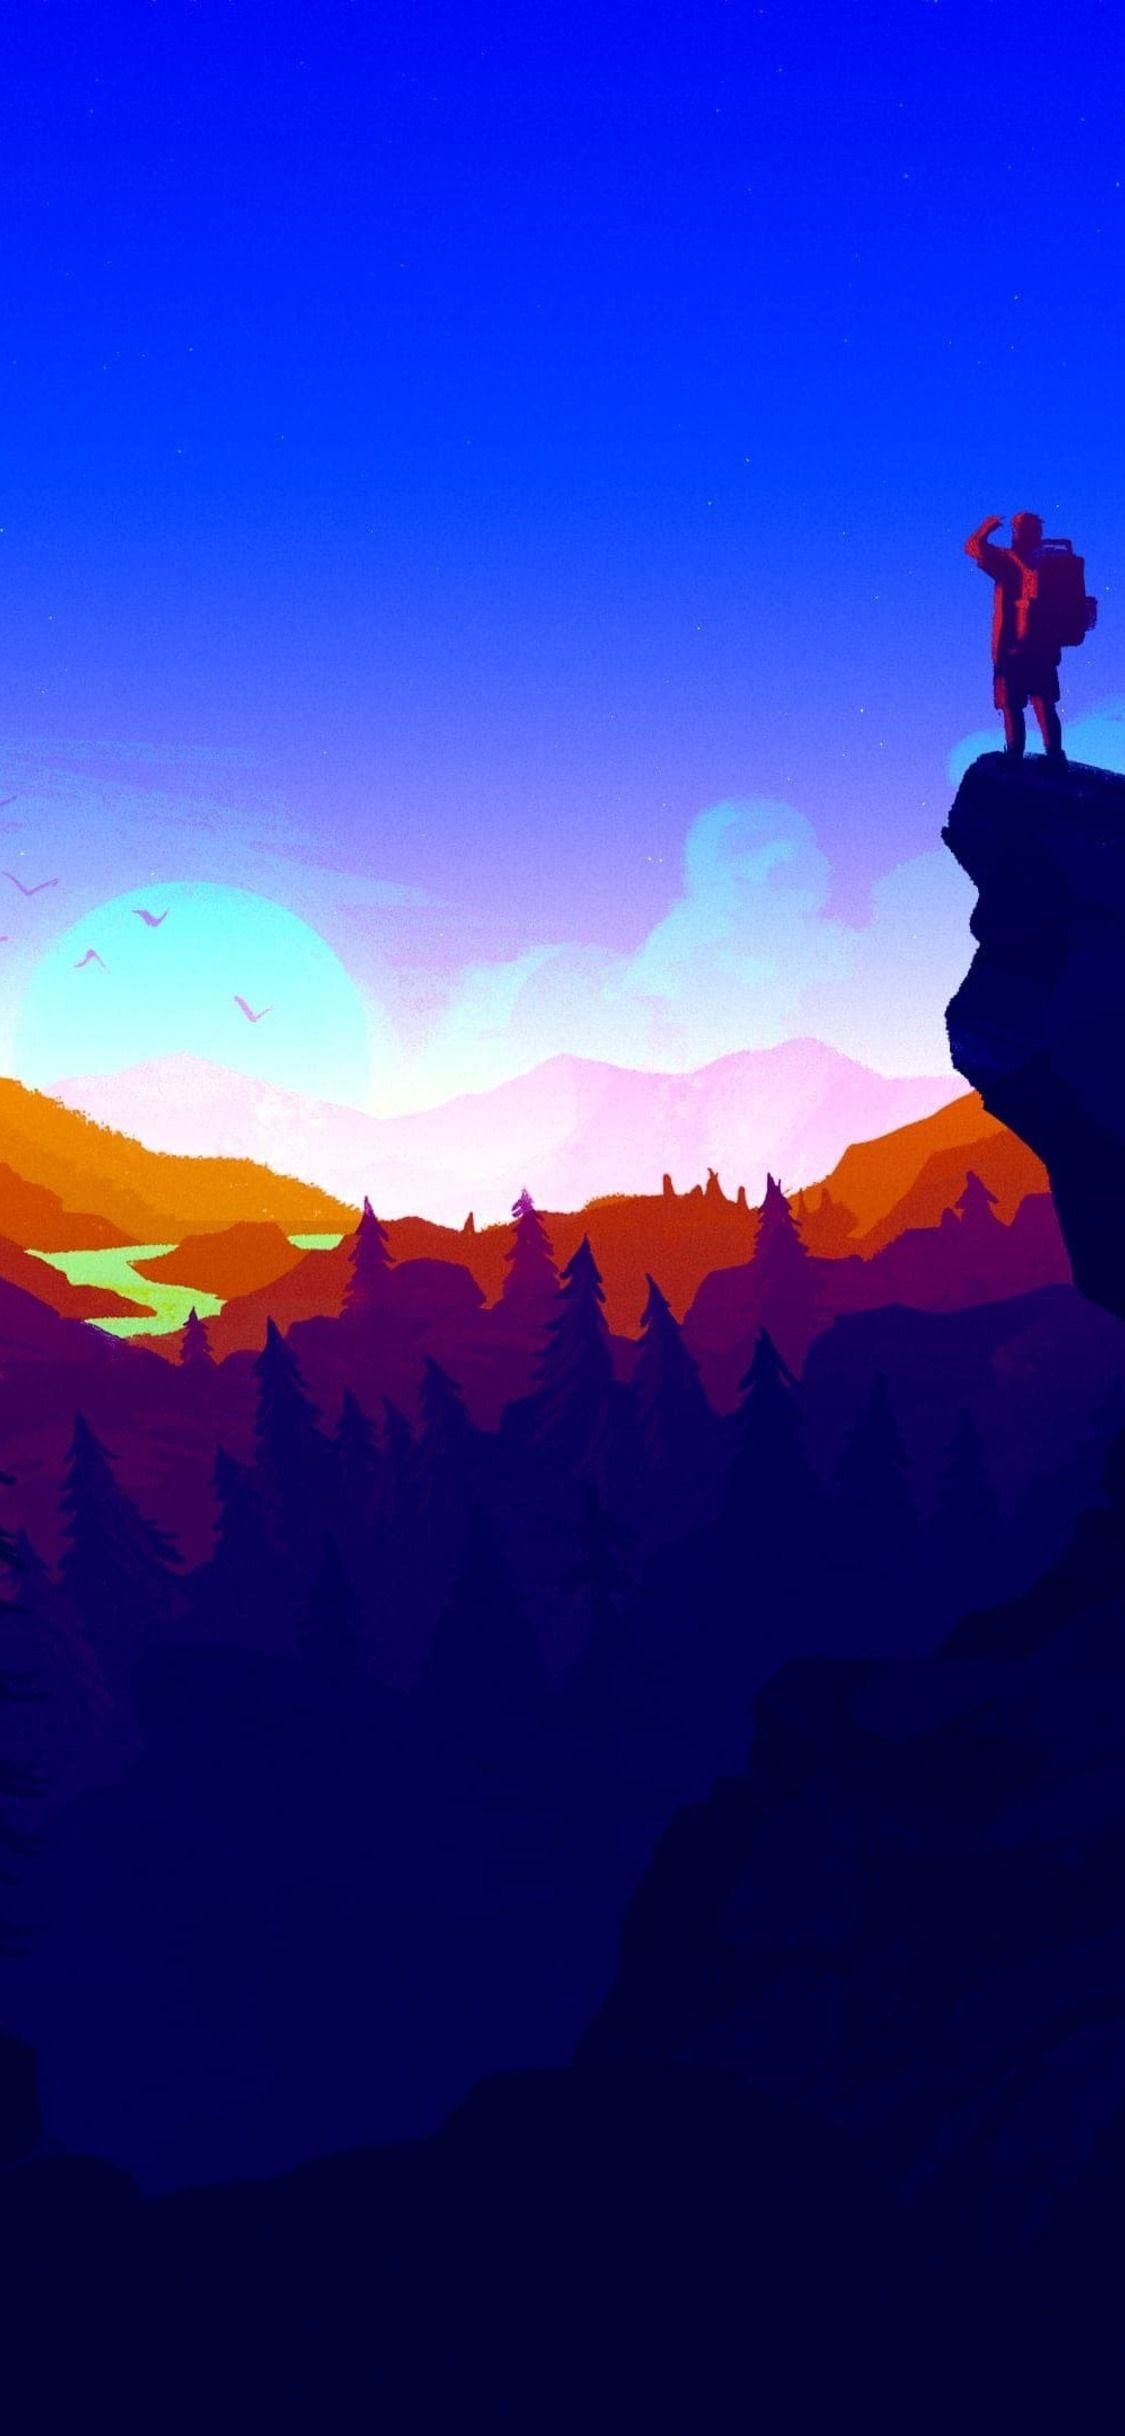 1125x2436 Firewatch 4k Iphone X,Iphone 10 HD 4k Wallpapers, Image